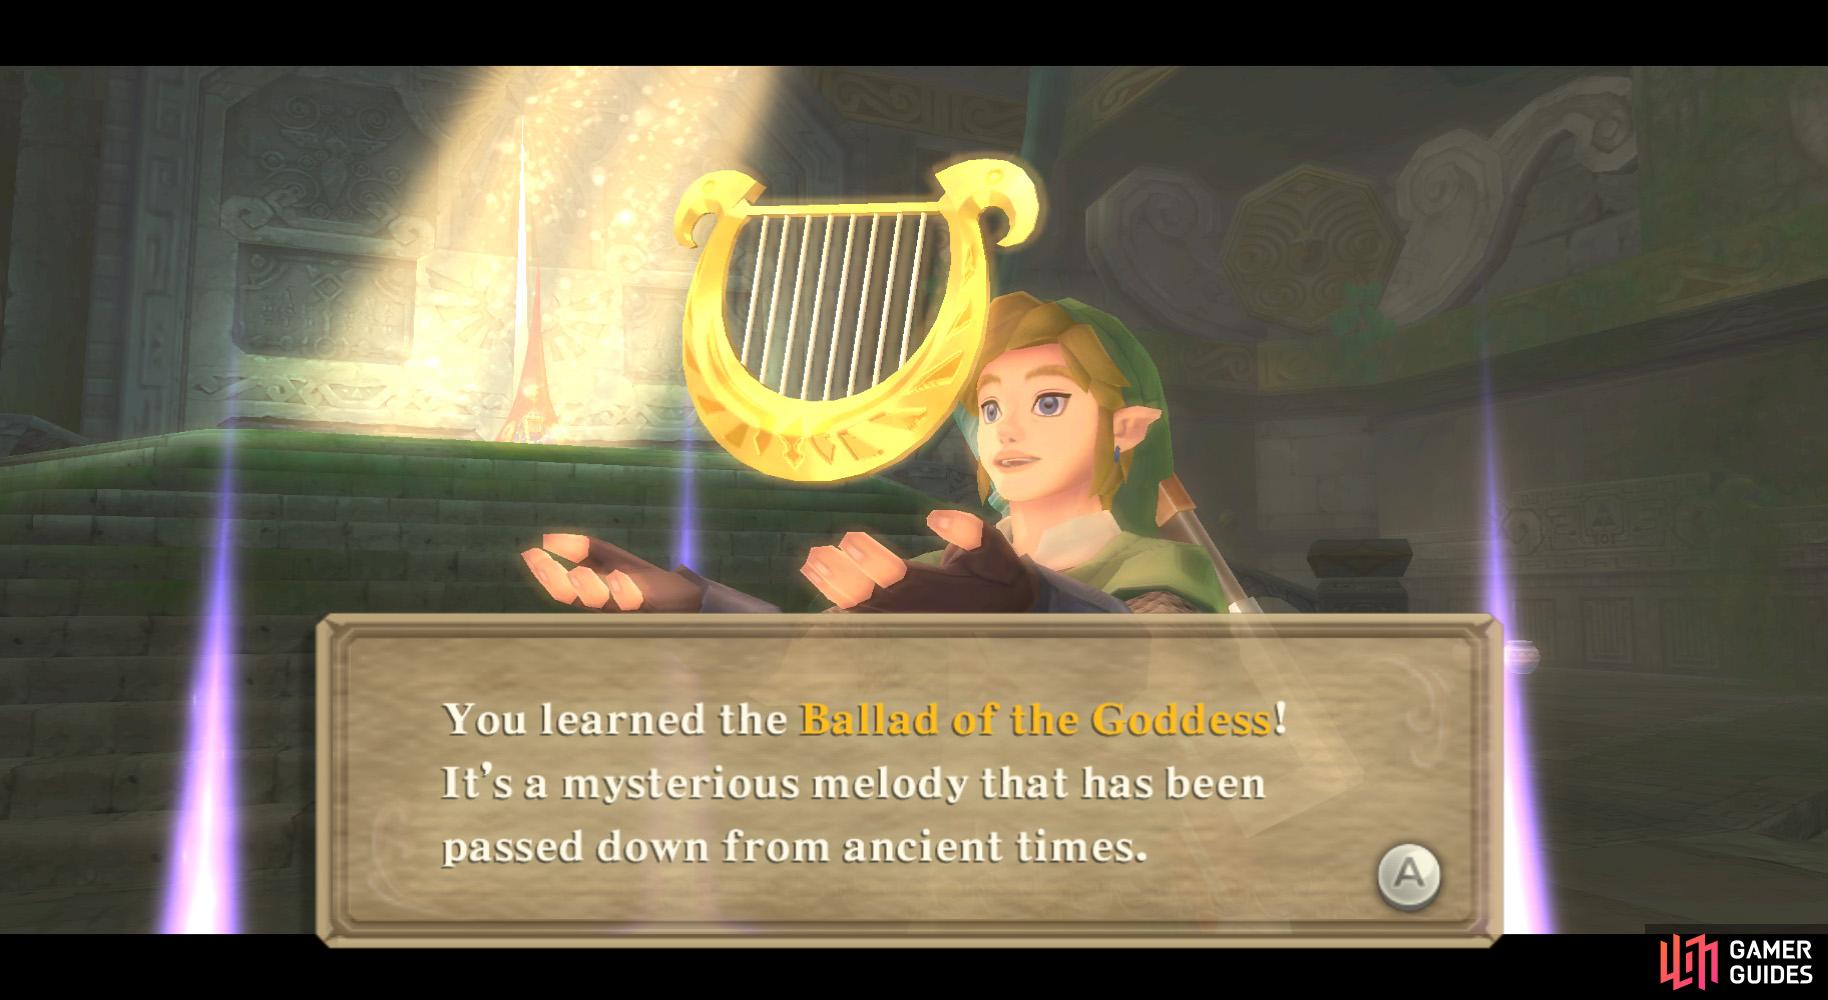 By the way, the Ballad of the Goddess is Zelda's Lullaby, played backwards!